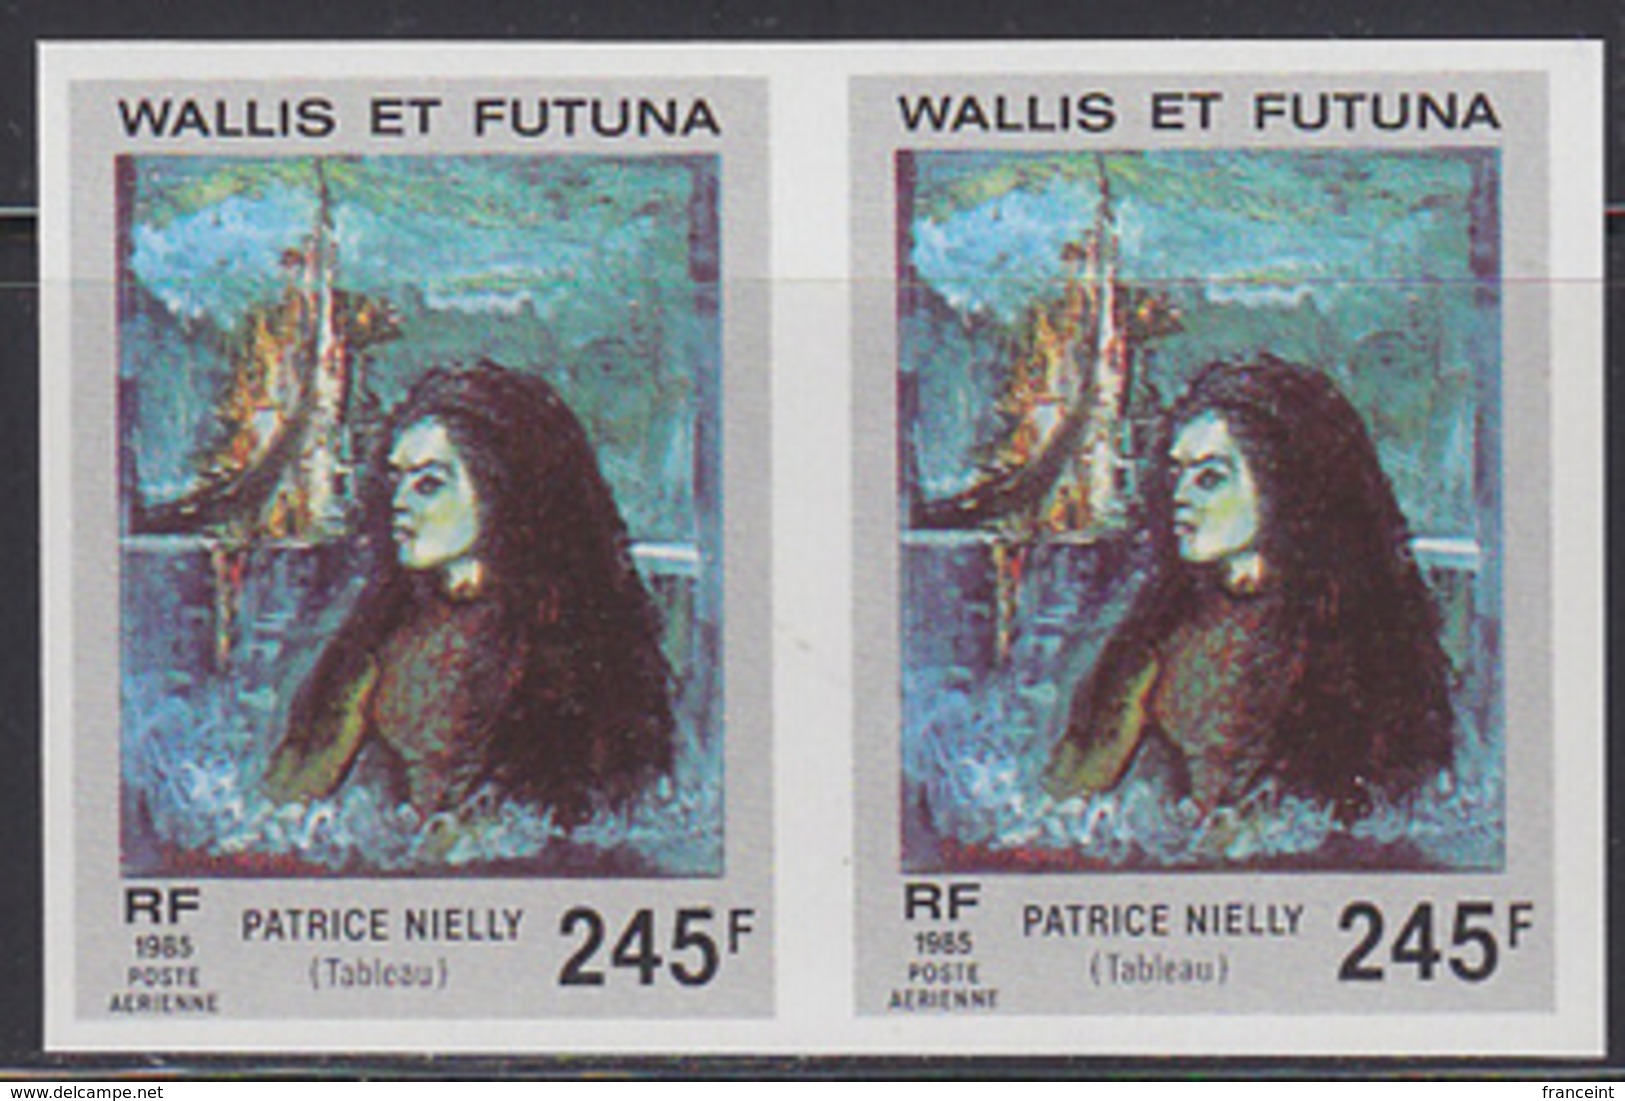 WALLIS & FUTUNA (1985) Portrait Of A Young Woman By Nielly. Imperforate Pair. Scott No C144, Yvert No PA147. - Imperforates, Proofs & Errors